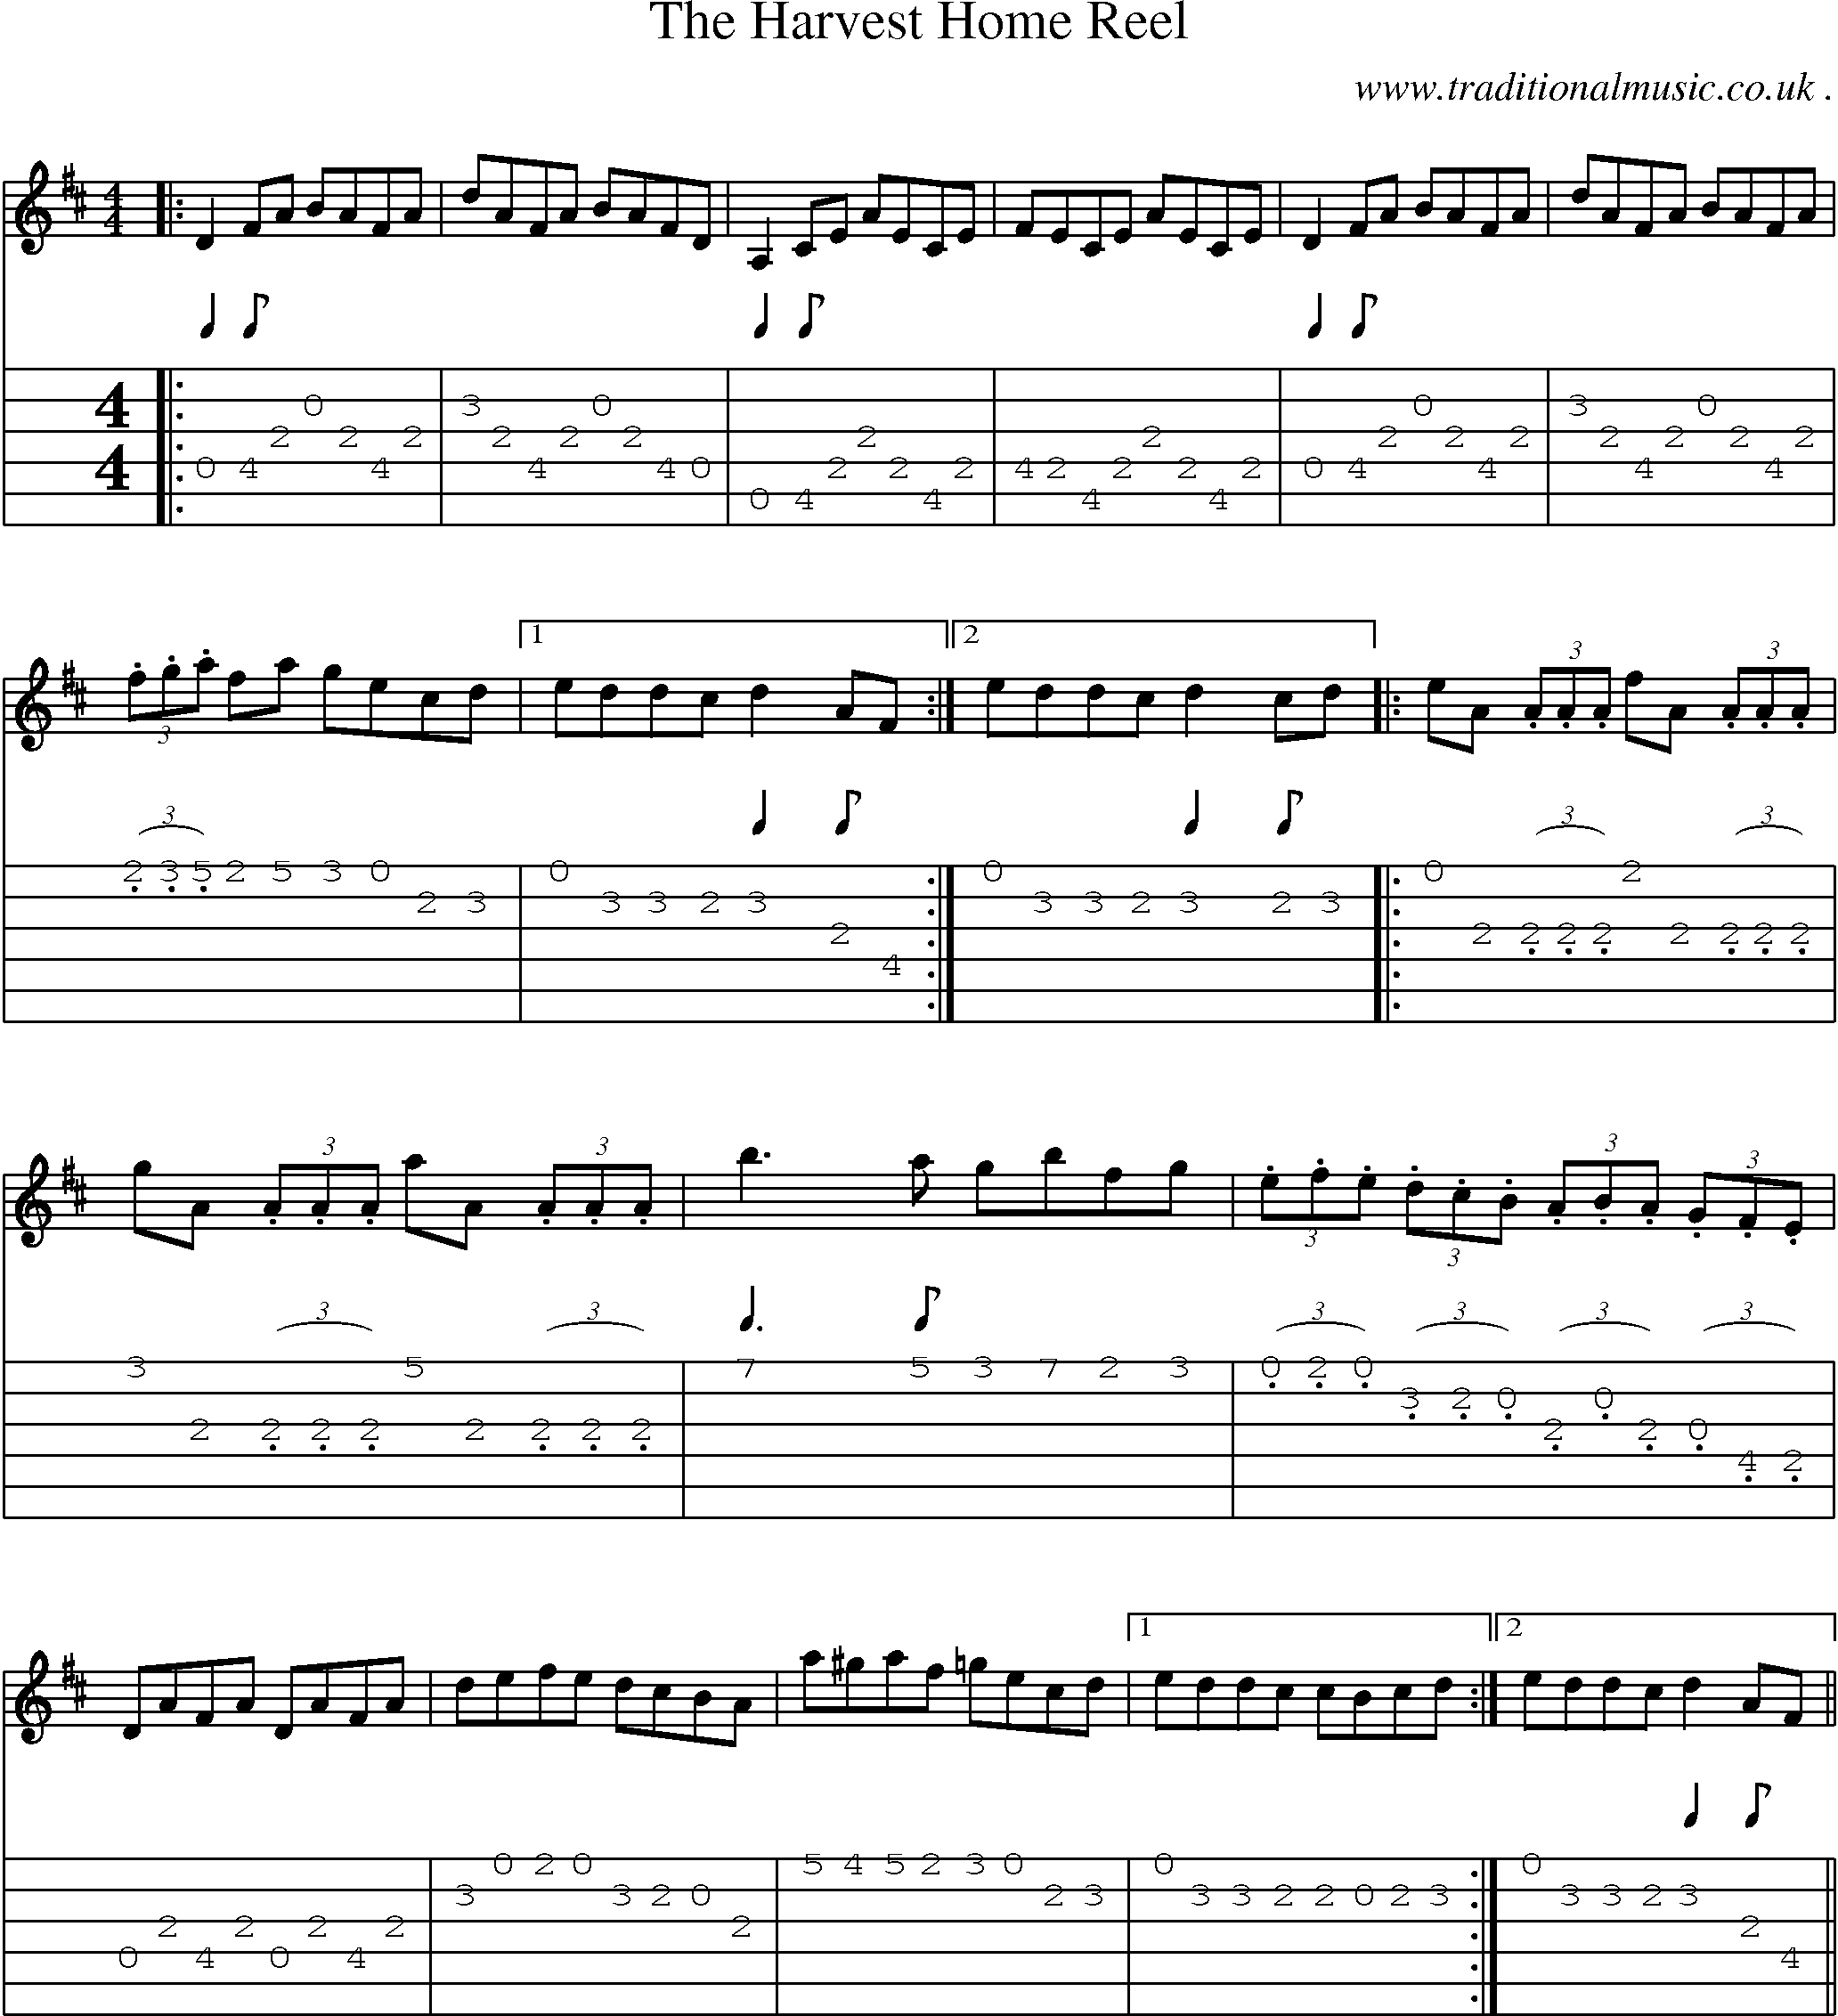 Sheet-Music and Guitar Tabs for The Harvest Home Reel